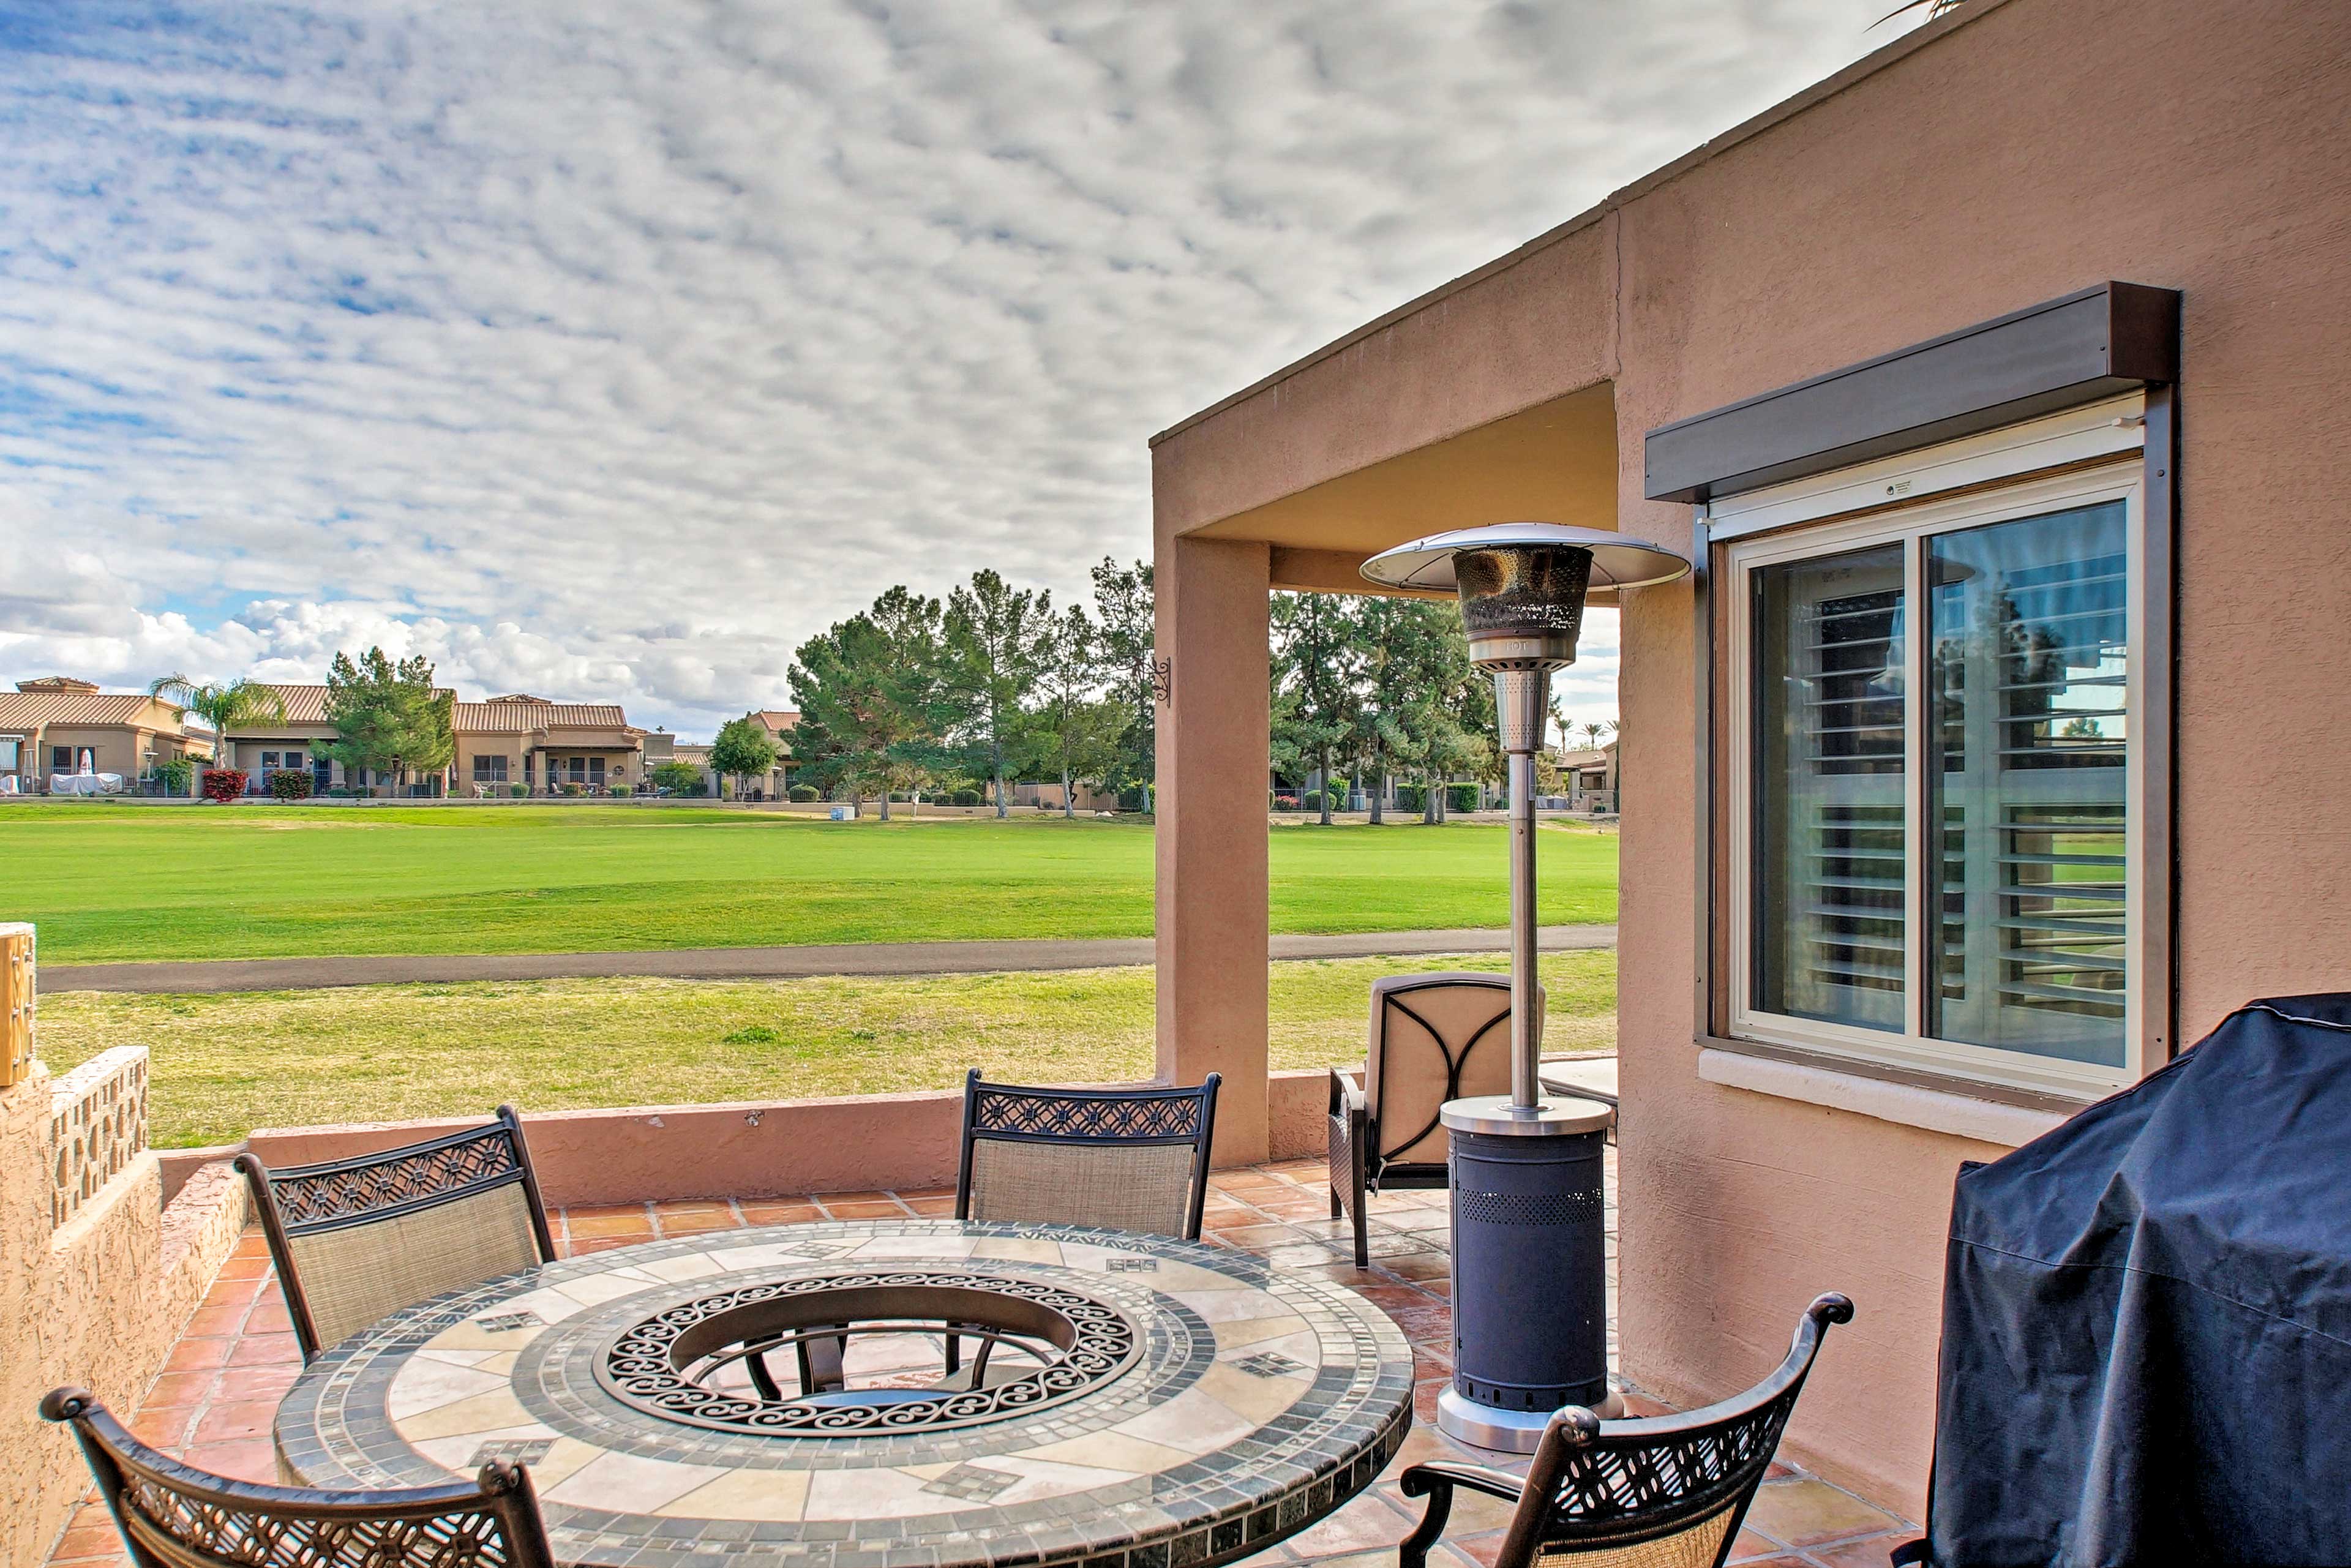 Your Arizona home-away-from-home comfortably sleeps up to 4 guests.